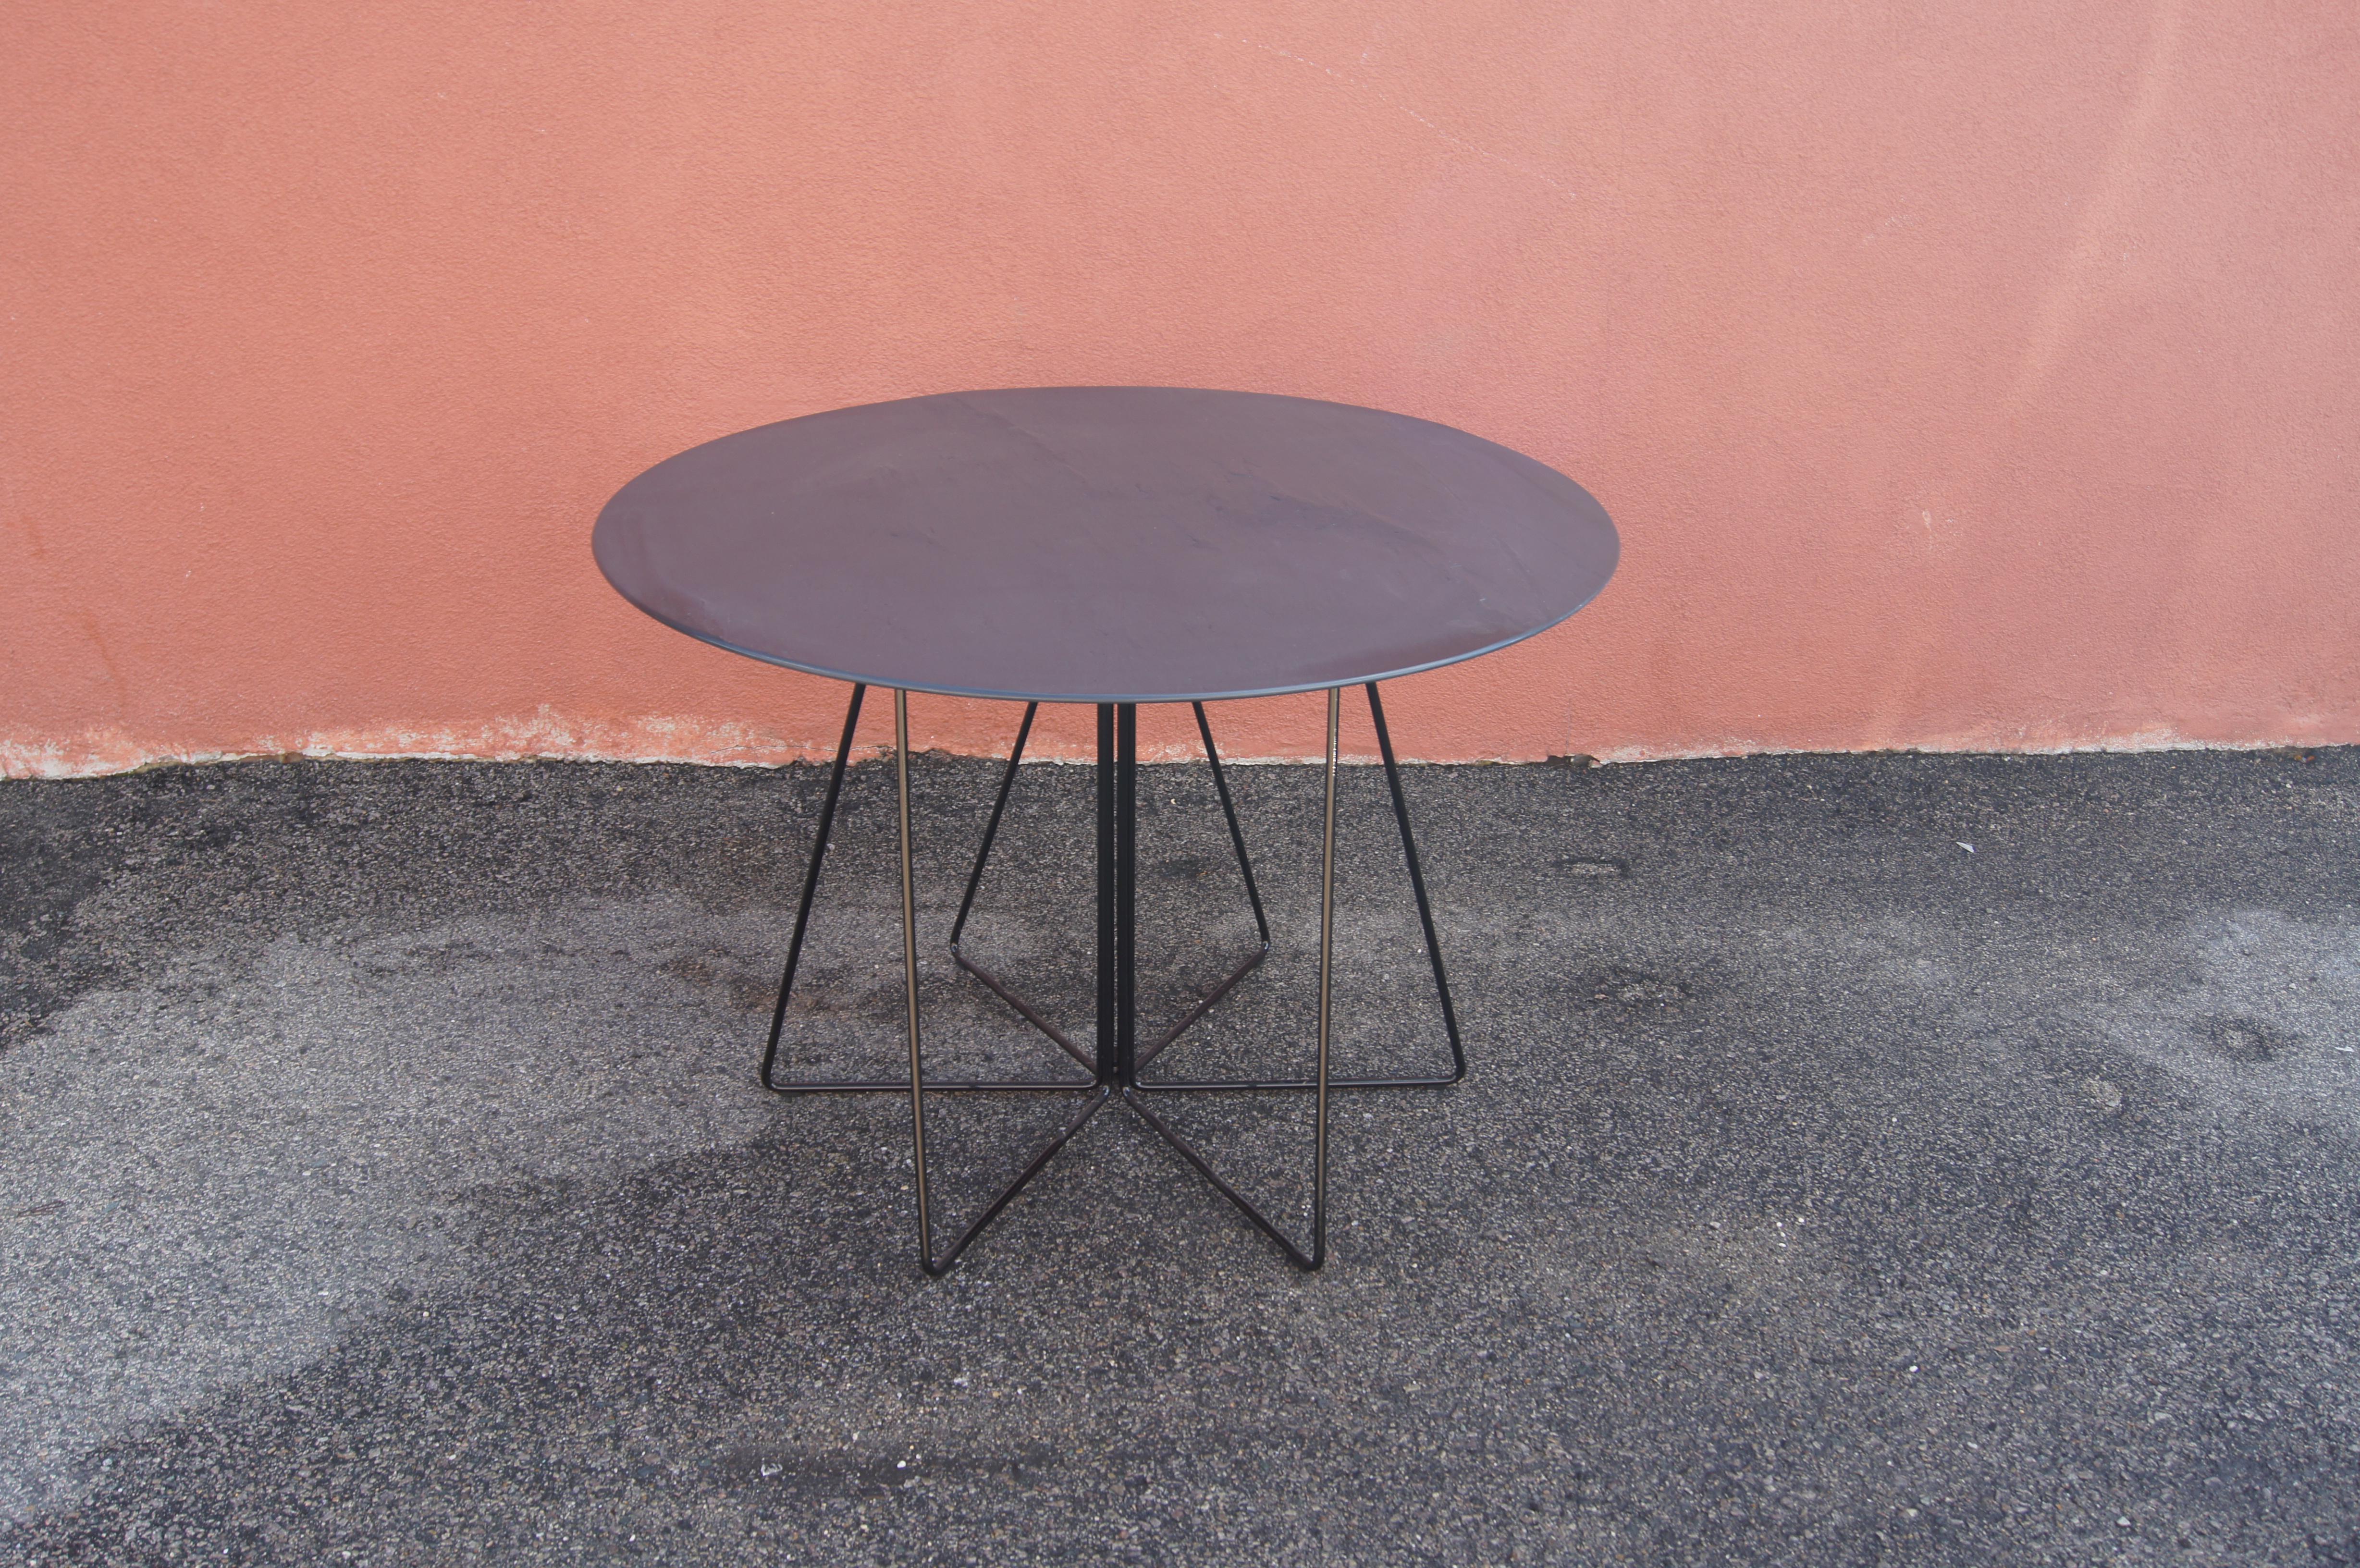 Designed by the Vignellis in 1994, the PaperClip table takes its name from the airy arrangement of steel rods. This later Knoll production features a round bevel-edged slate top and a black powder coat on the base that makes it perfect for use